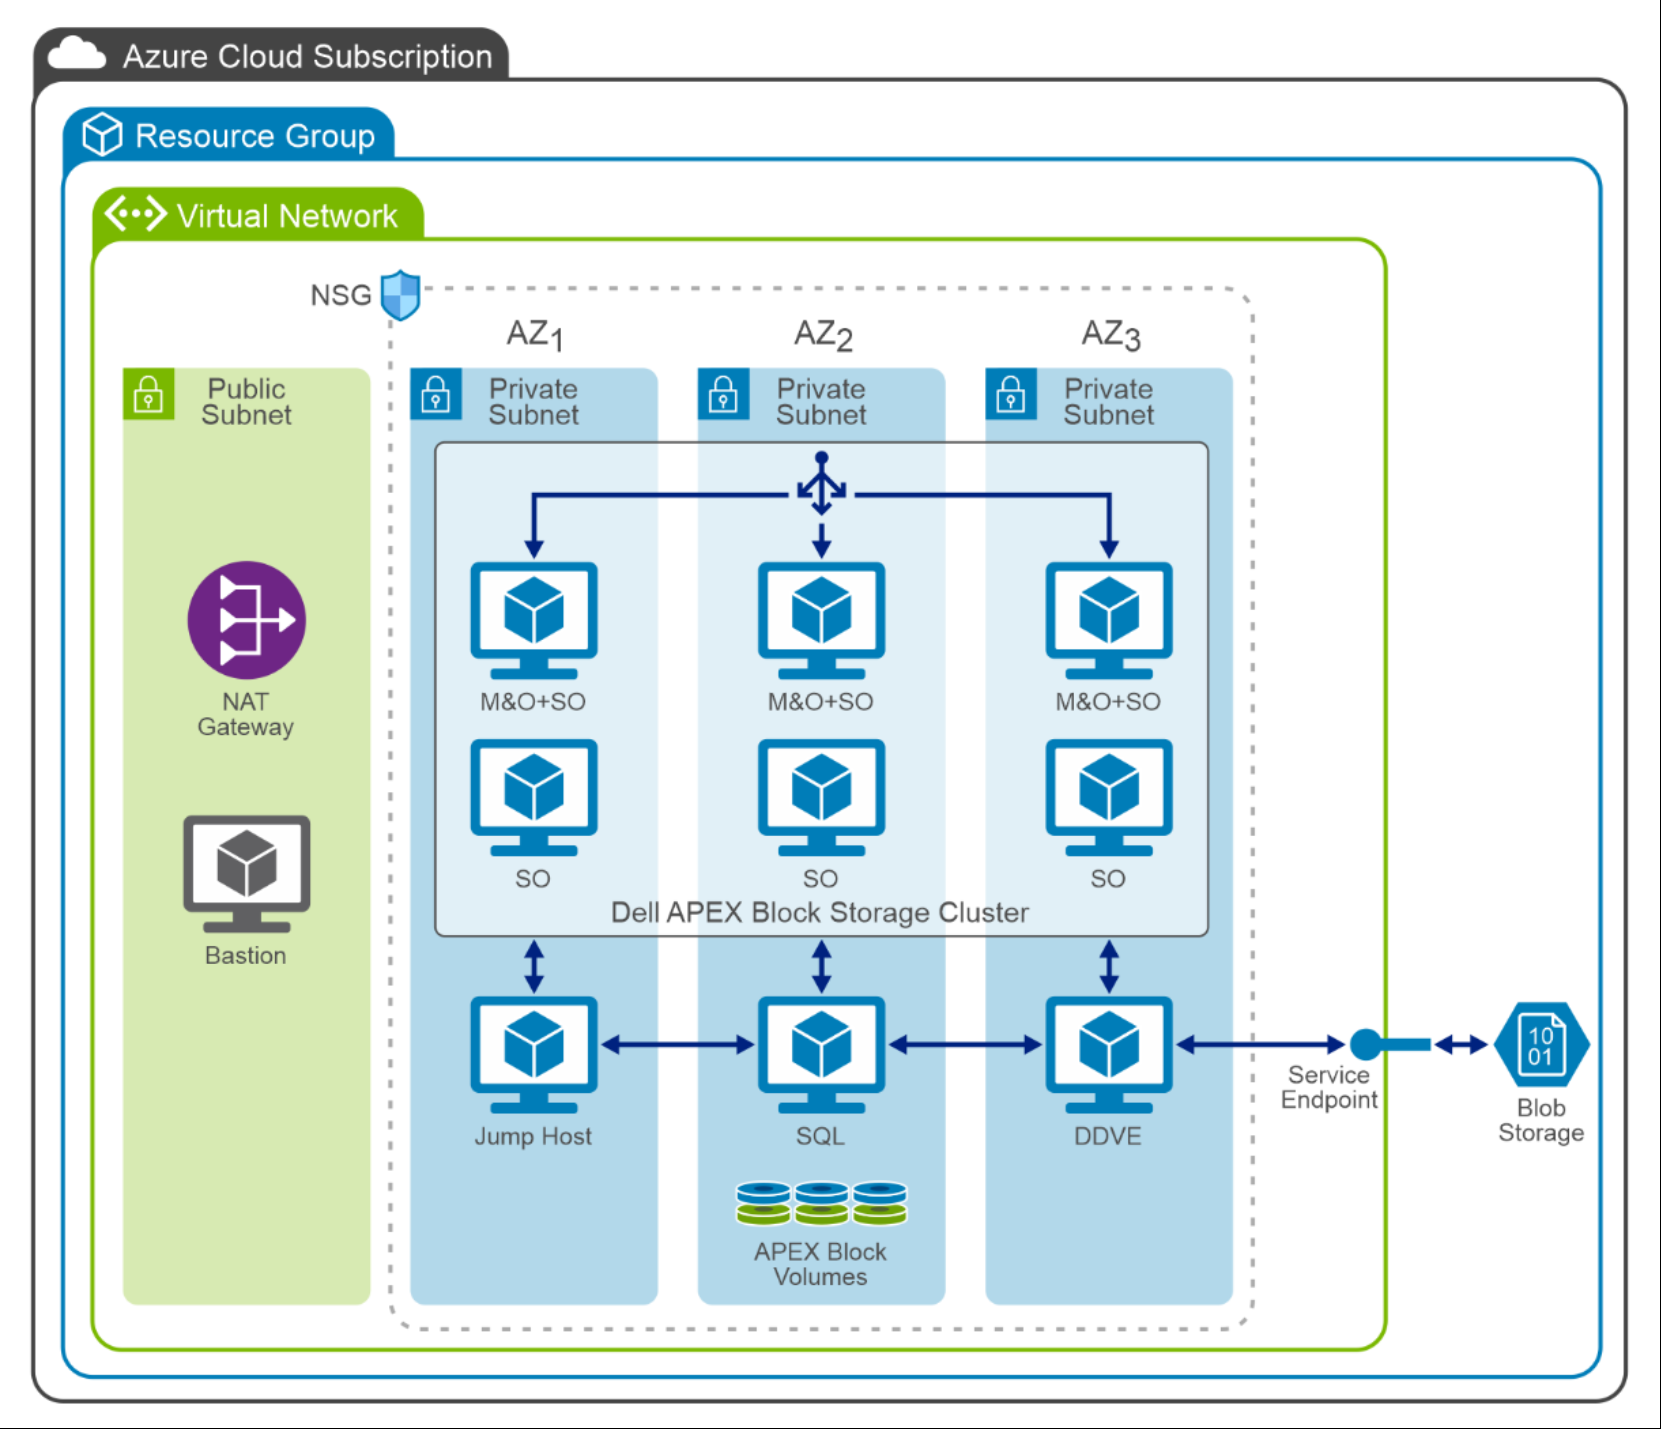 This figure shows the architecture of a two-layer system deployed across multiple AZs within a single Azure Resource Group.